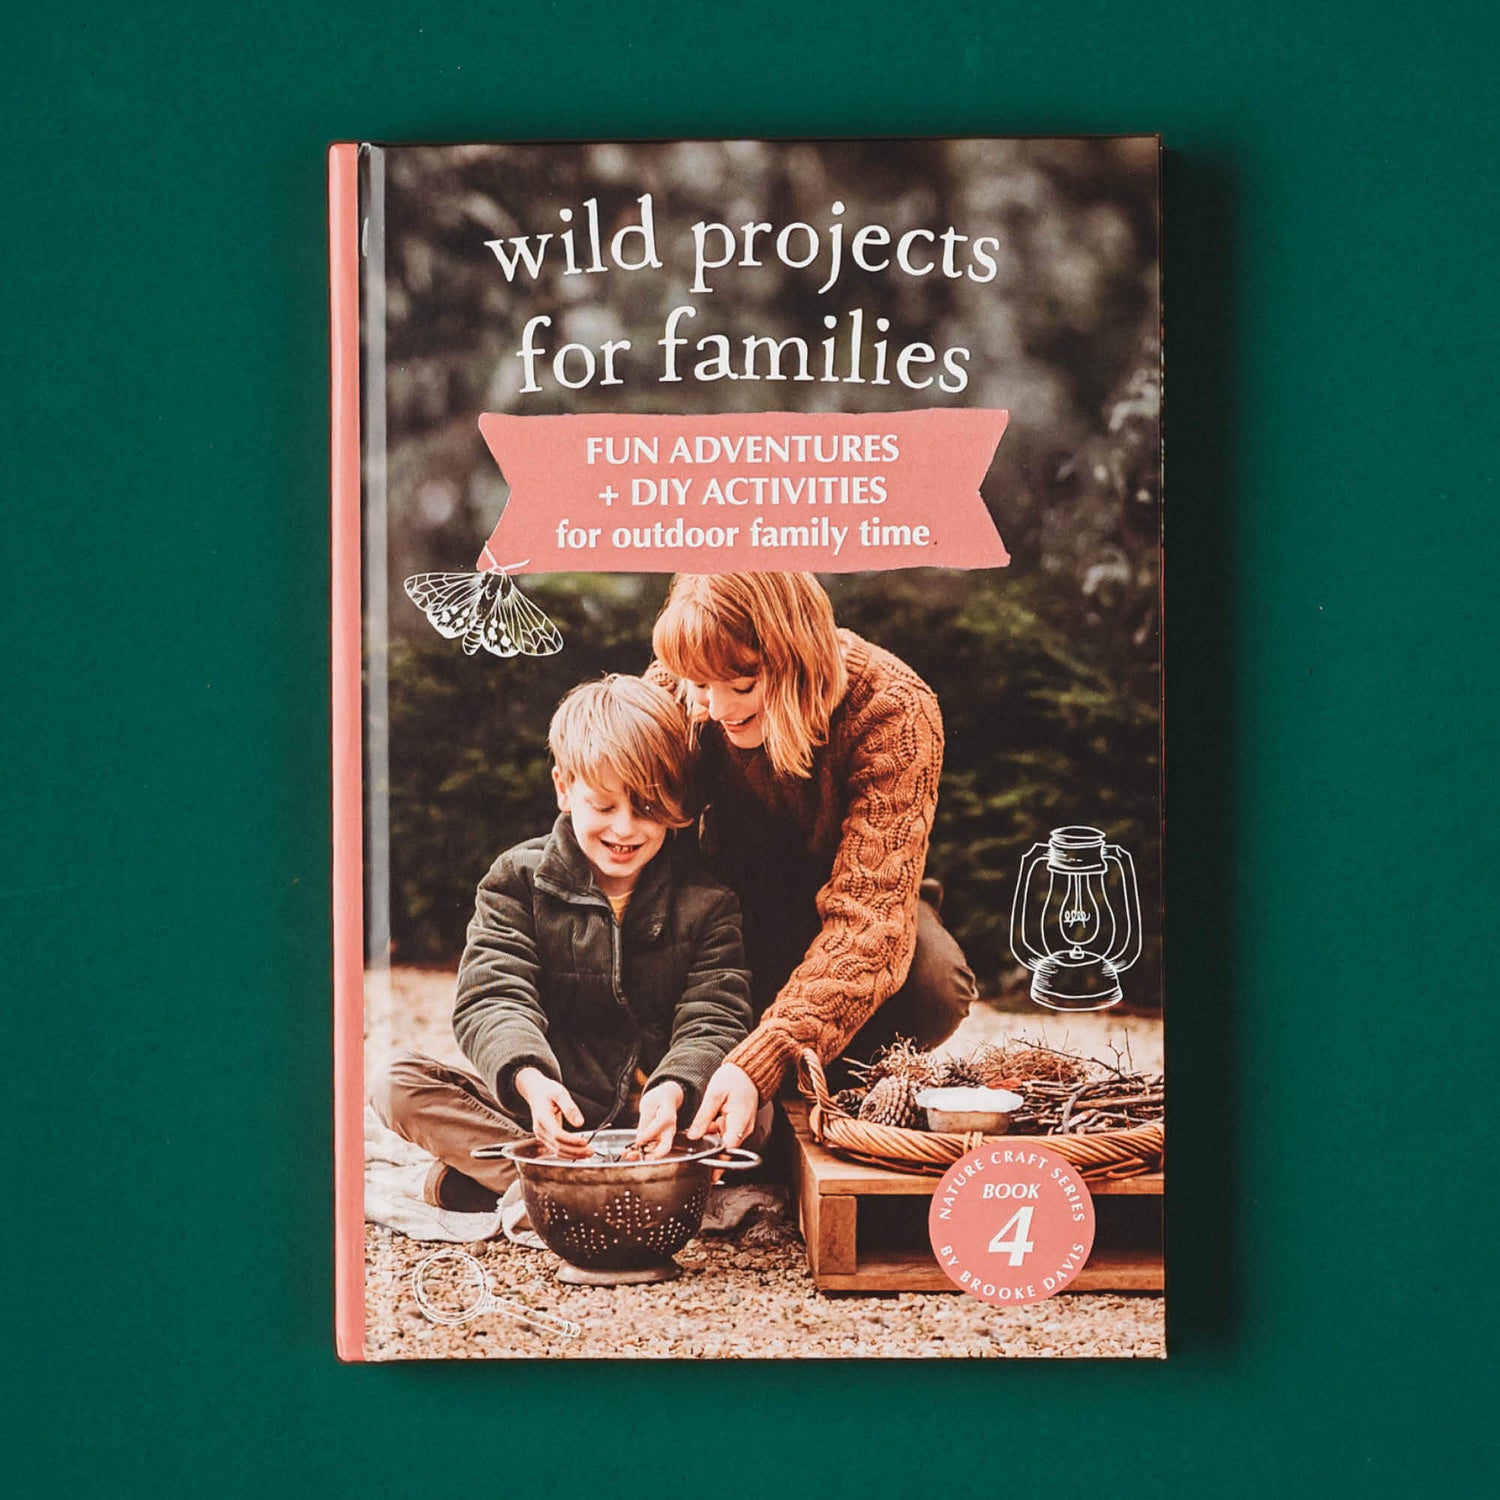 Wild Projects for Families book has fun adventures and DIY activities for family outdoor time, is made in Australia by Your Wild Books.